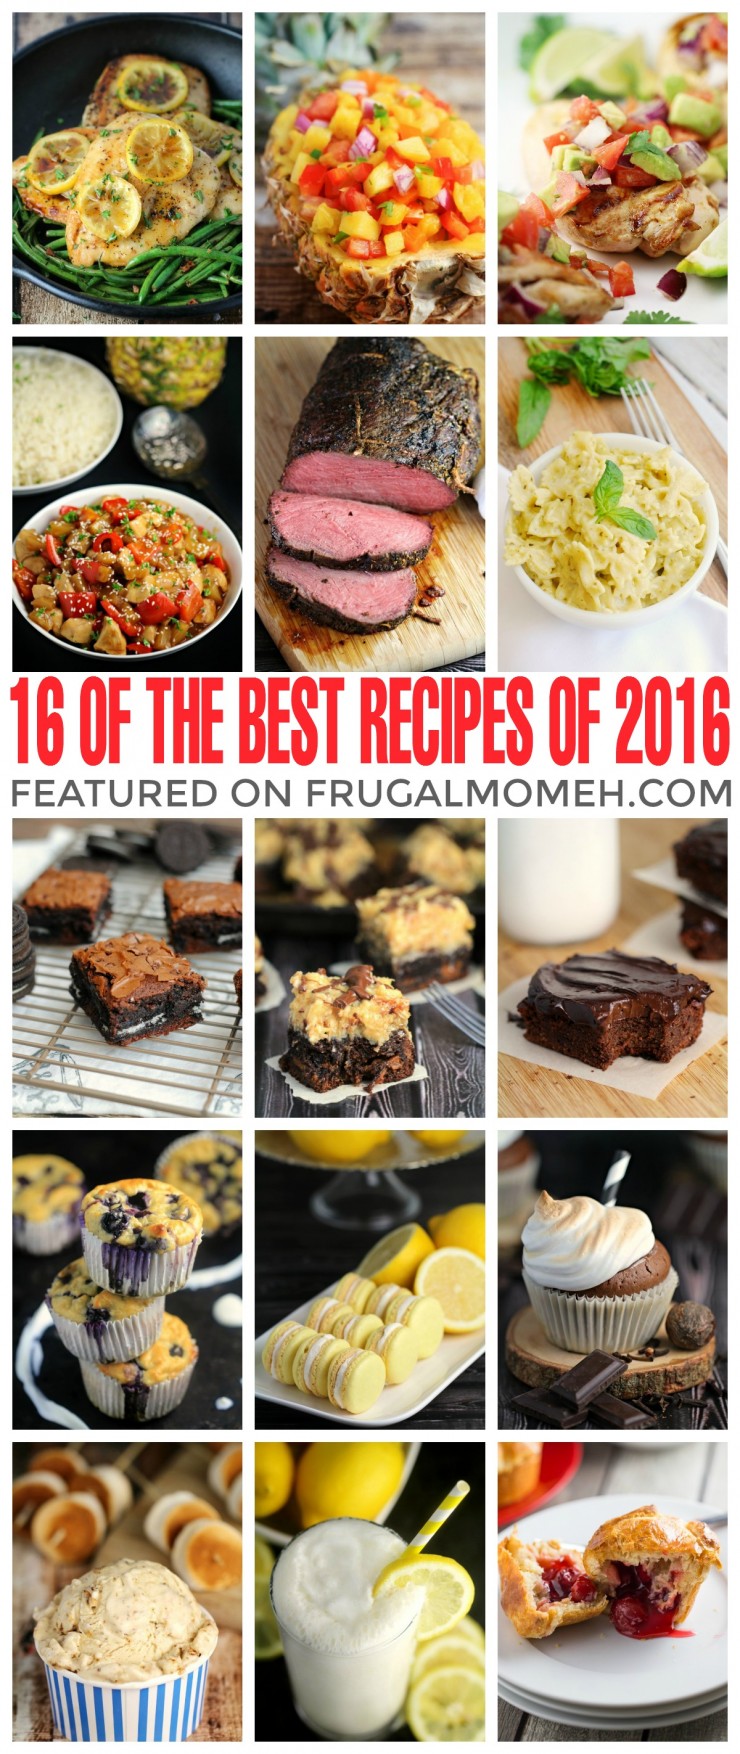 16 of the Top Recipes of 2016 including entrees, dessert and more. Avacodo brownies, chicken recipes, ice cream and a super delicious but healthy muffin recipe!